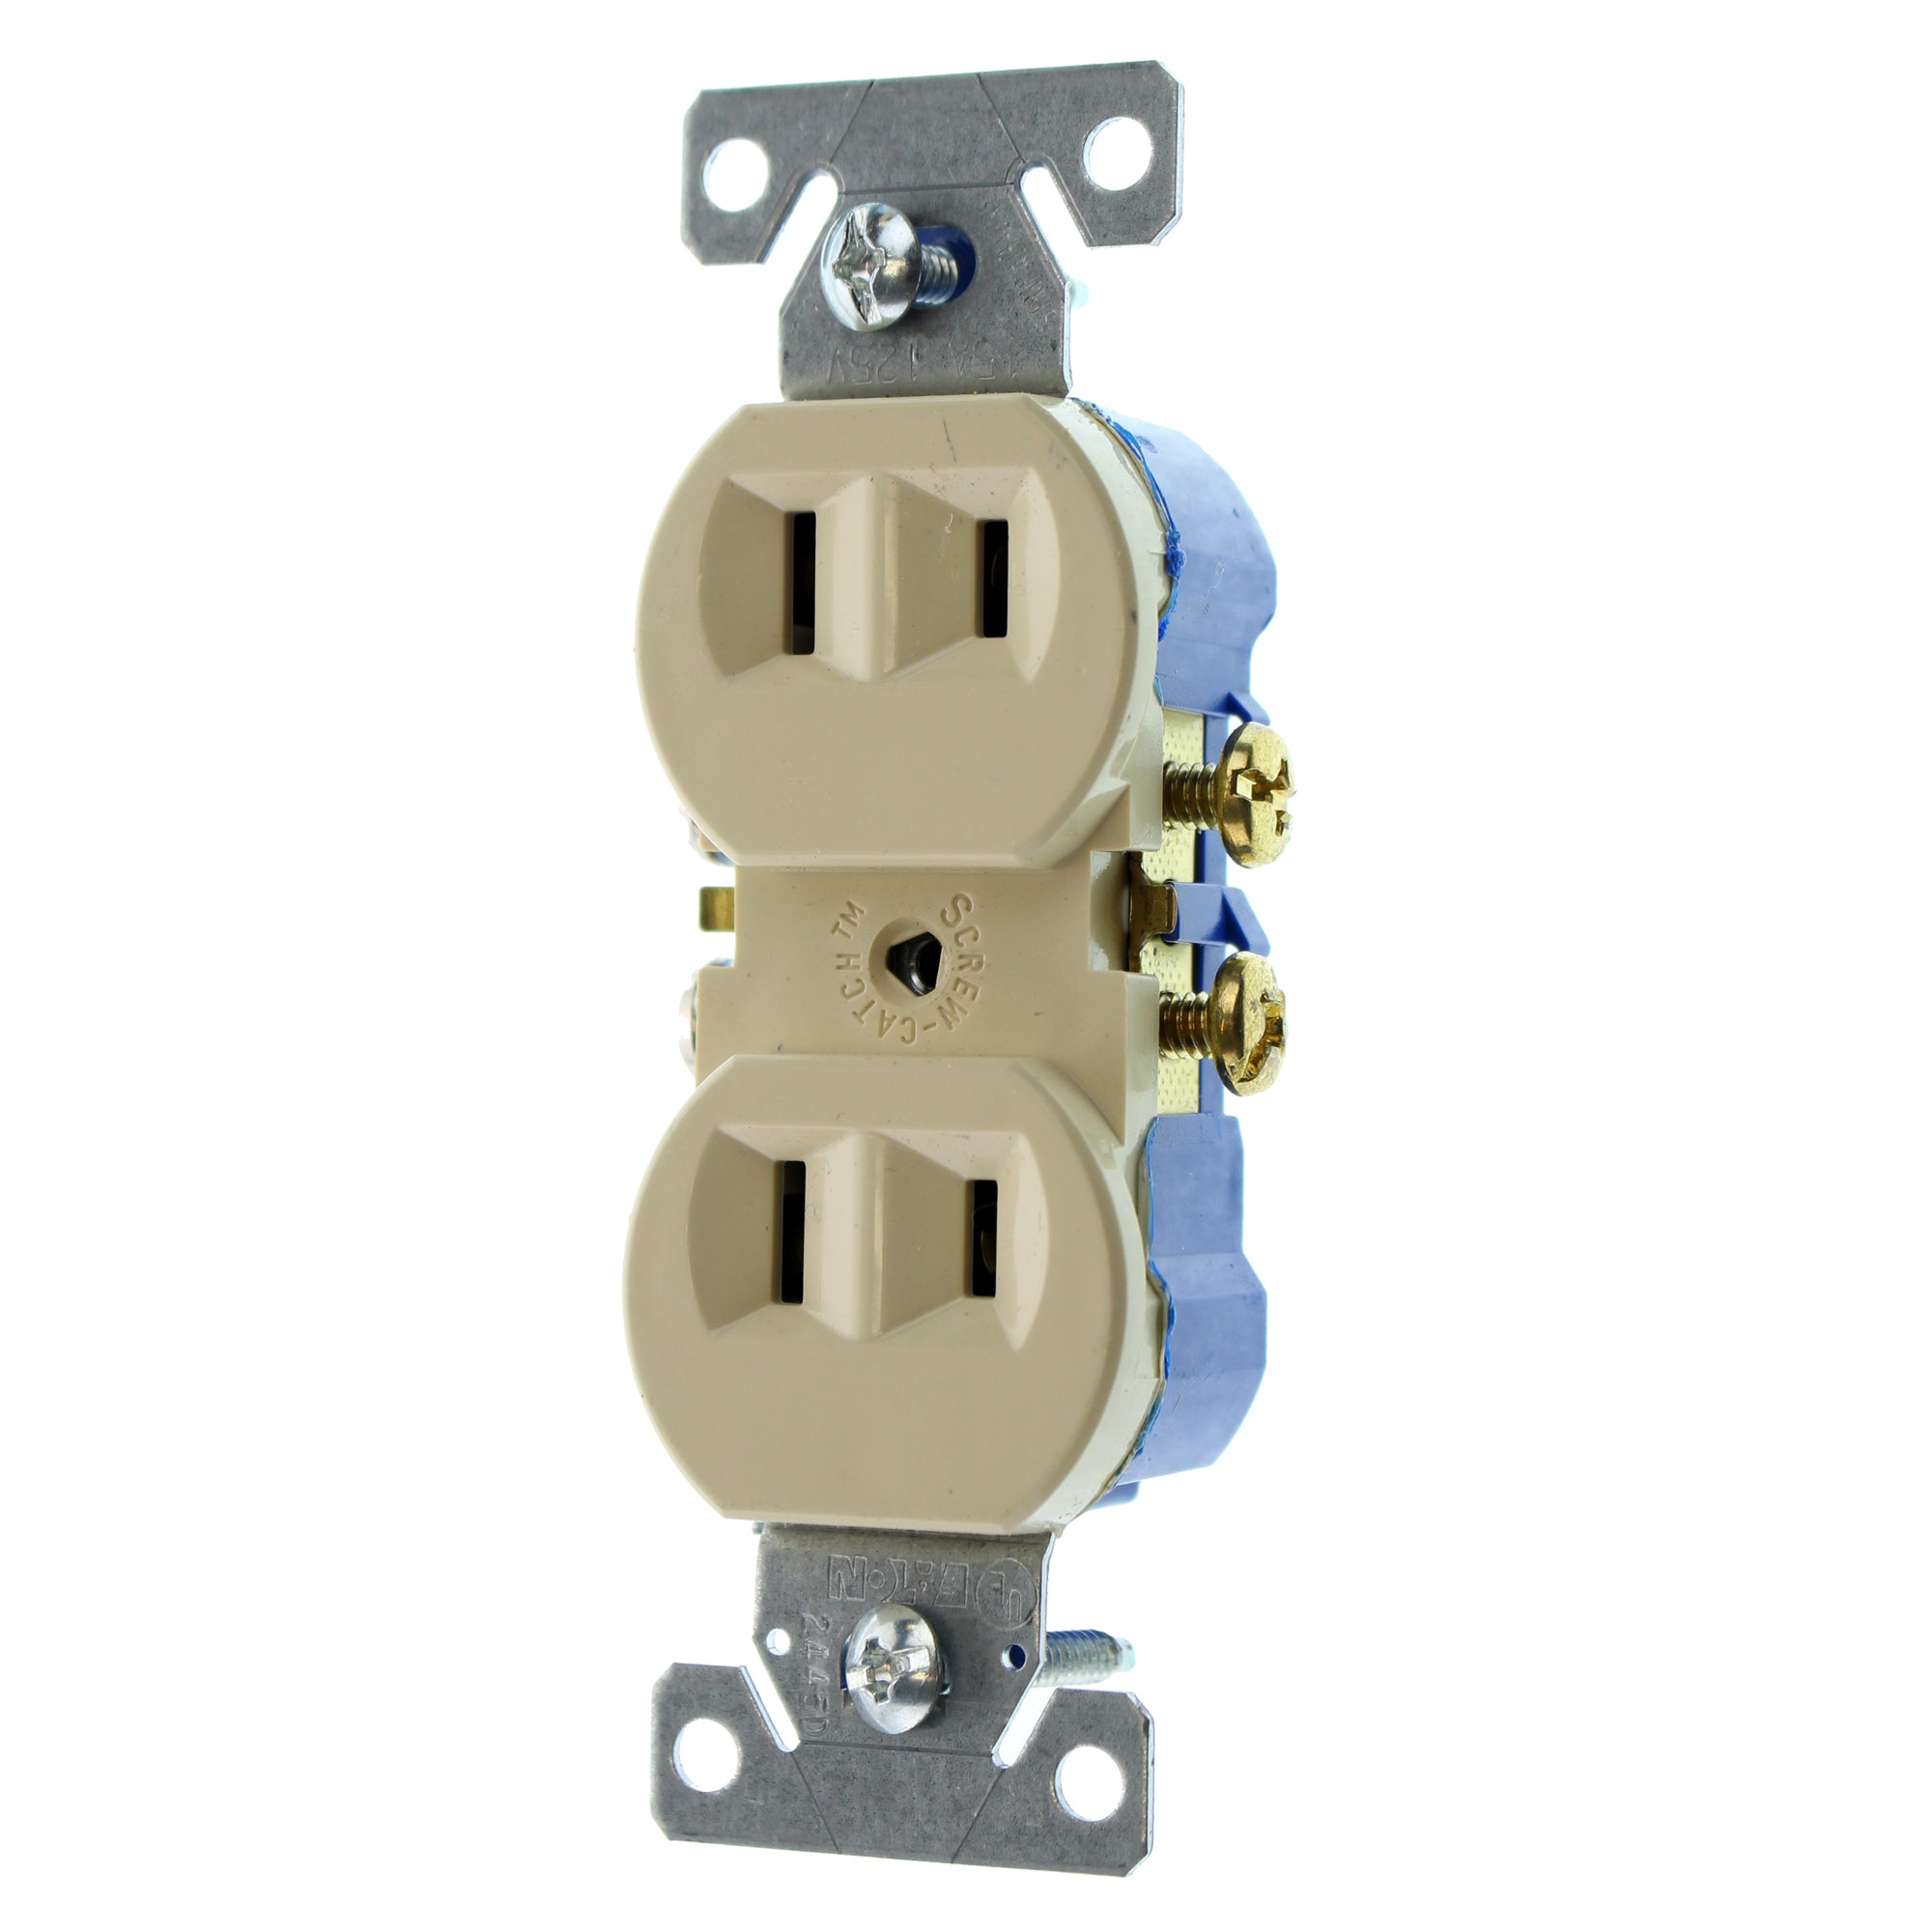 EATON, EATON COOPER 736V-SP-L RECETPACLE OUTLET, NON-GROUNDING, 2-WIRE, 15A 120V, IVORY